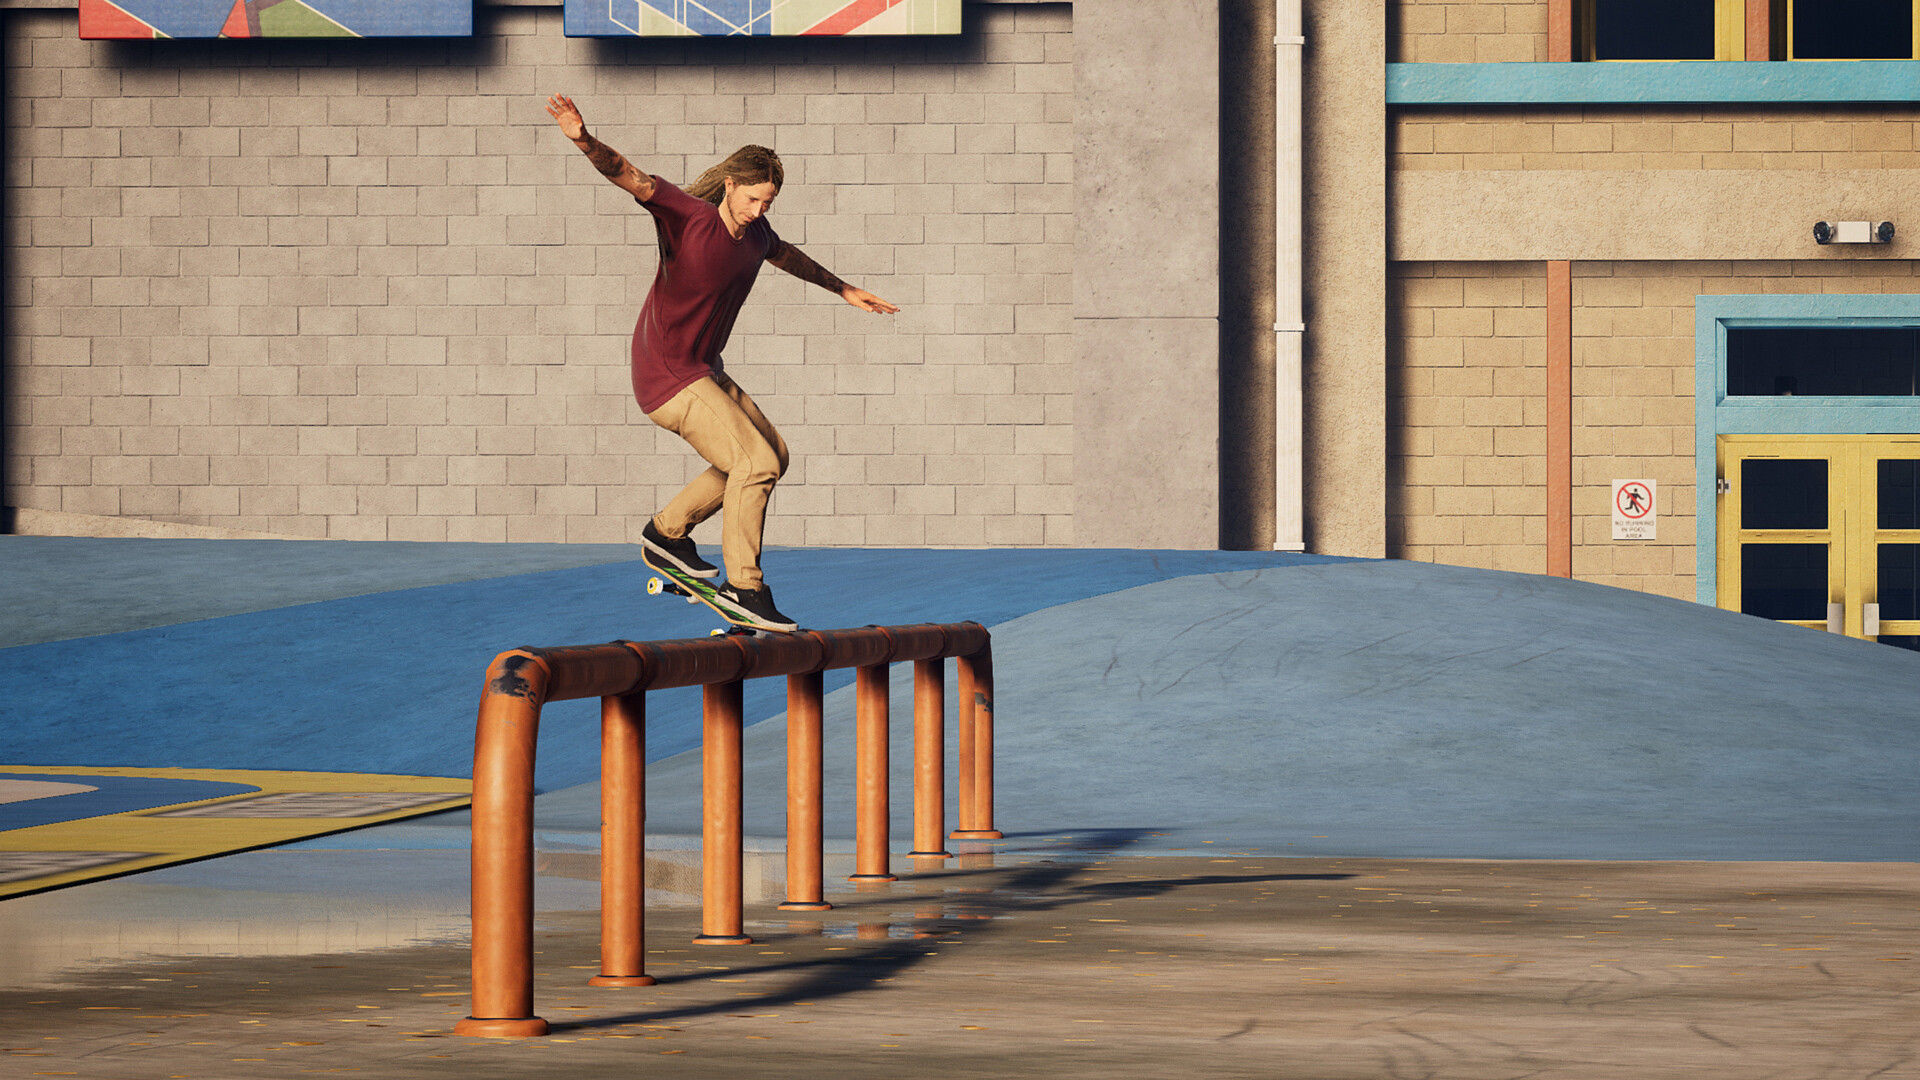 Tony Hawk’s Pro Skater 1 + 2 Has Finally Launched on Steam